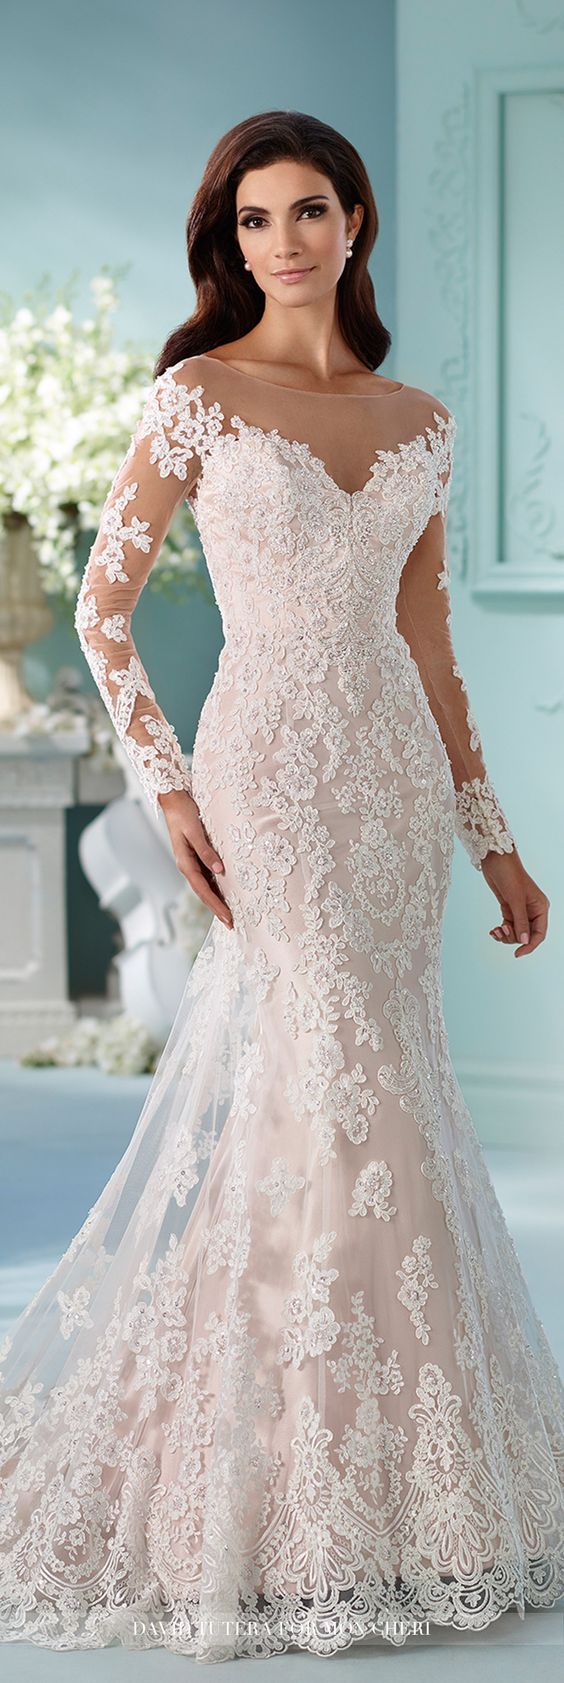 Lace Wedding Dresses for 2017